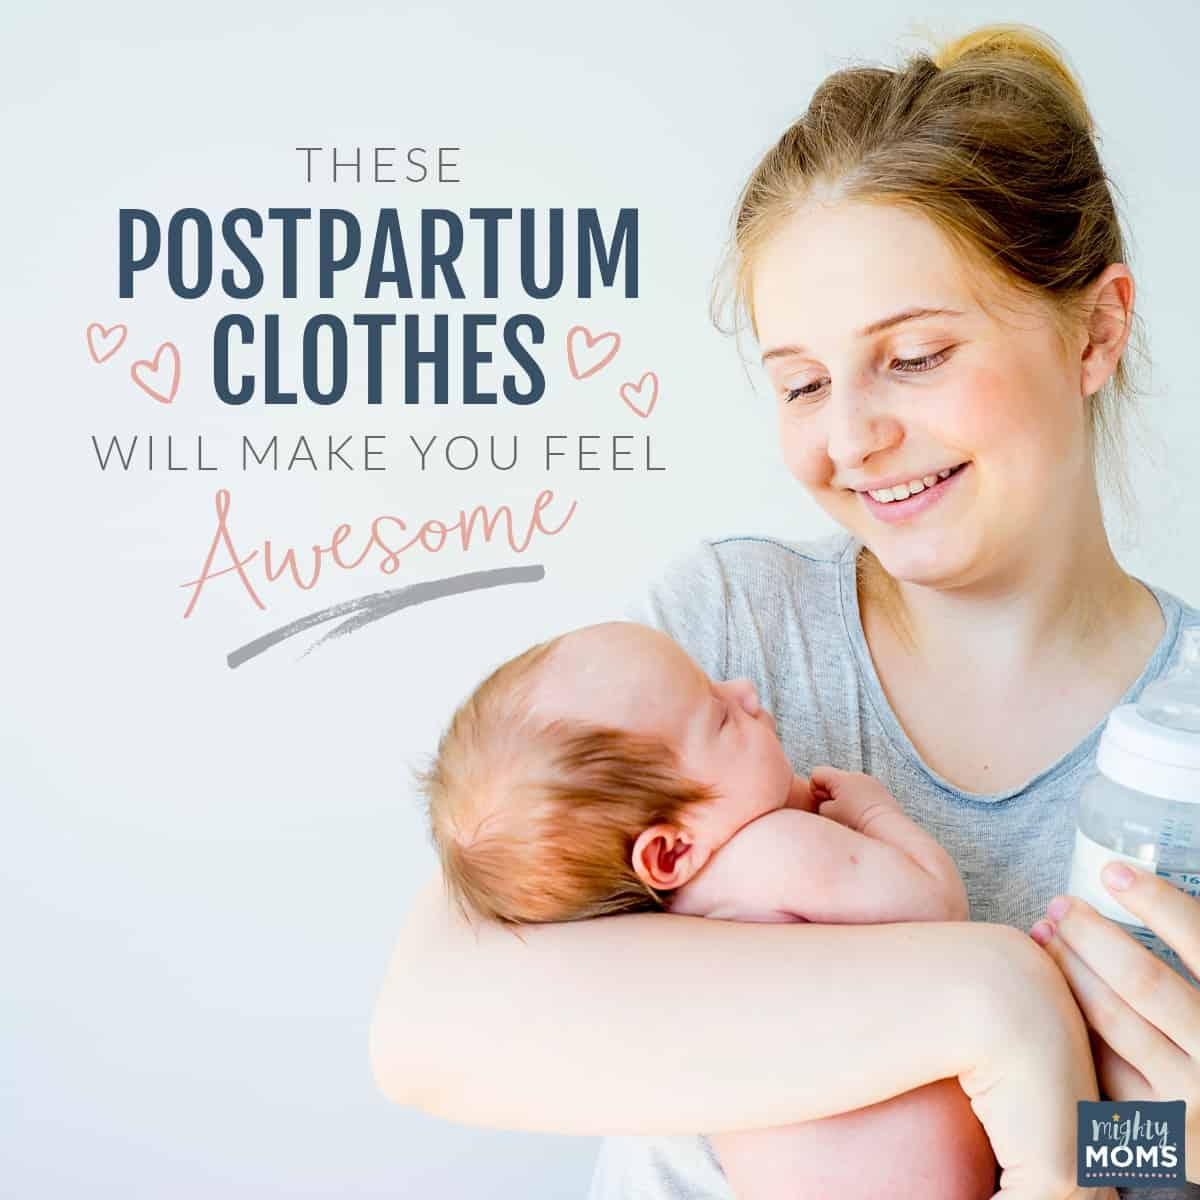 These Postpartum Clothes will make you feel awesome - MightyMoms.club